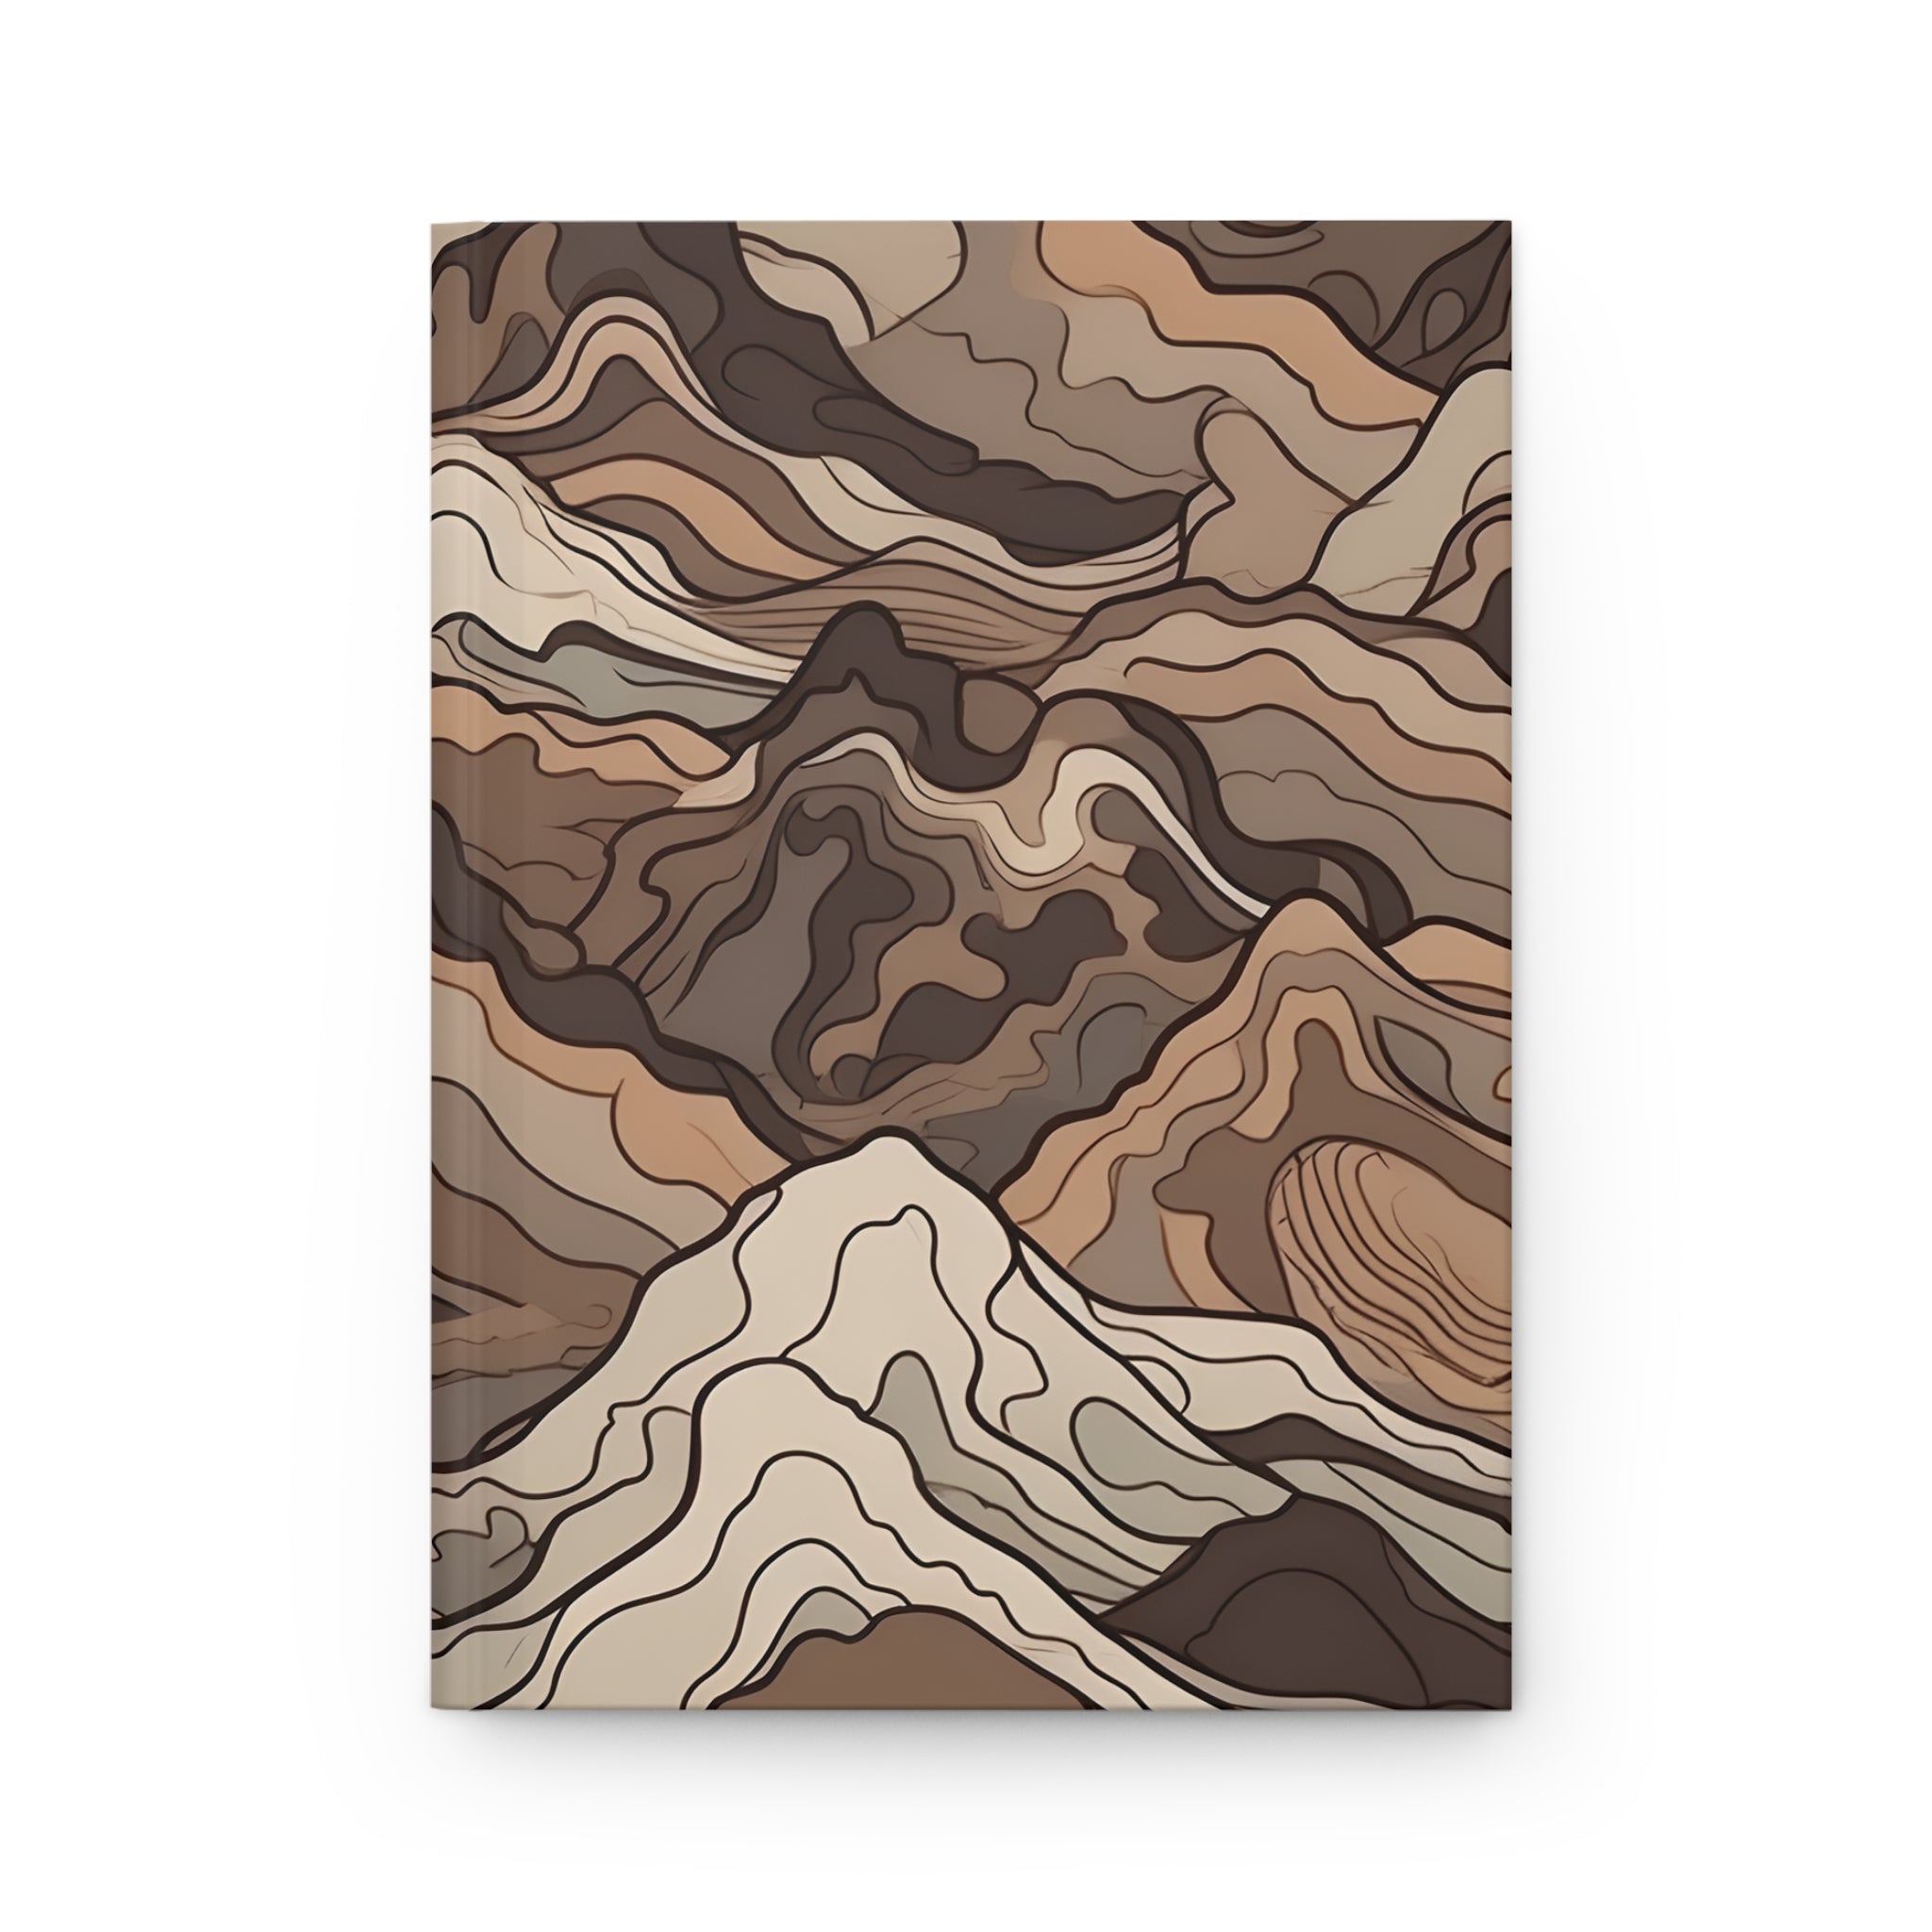 Mountain Camouflage Hardcover Journal - Ruled Pages - Outdoor Adventure Notebook - Hiking, Camping, Hunting Journal - Gift for Nature Lovers